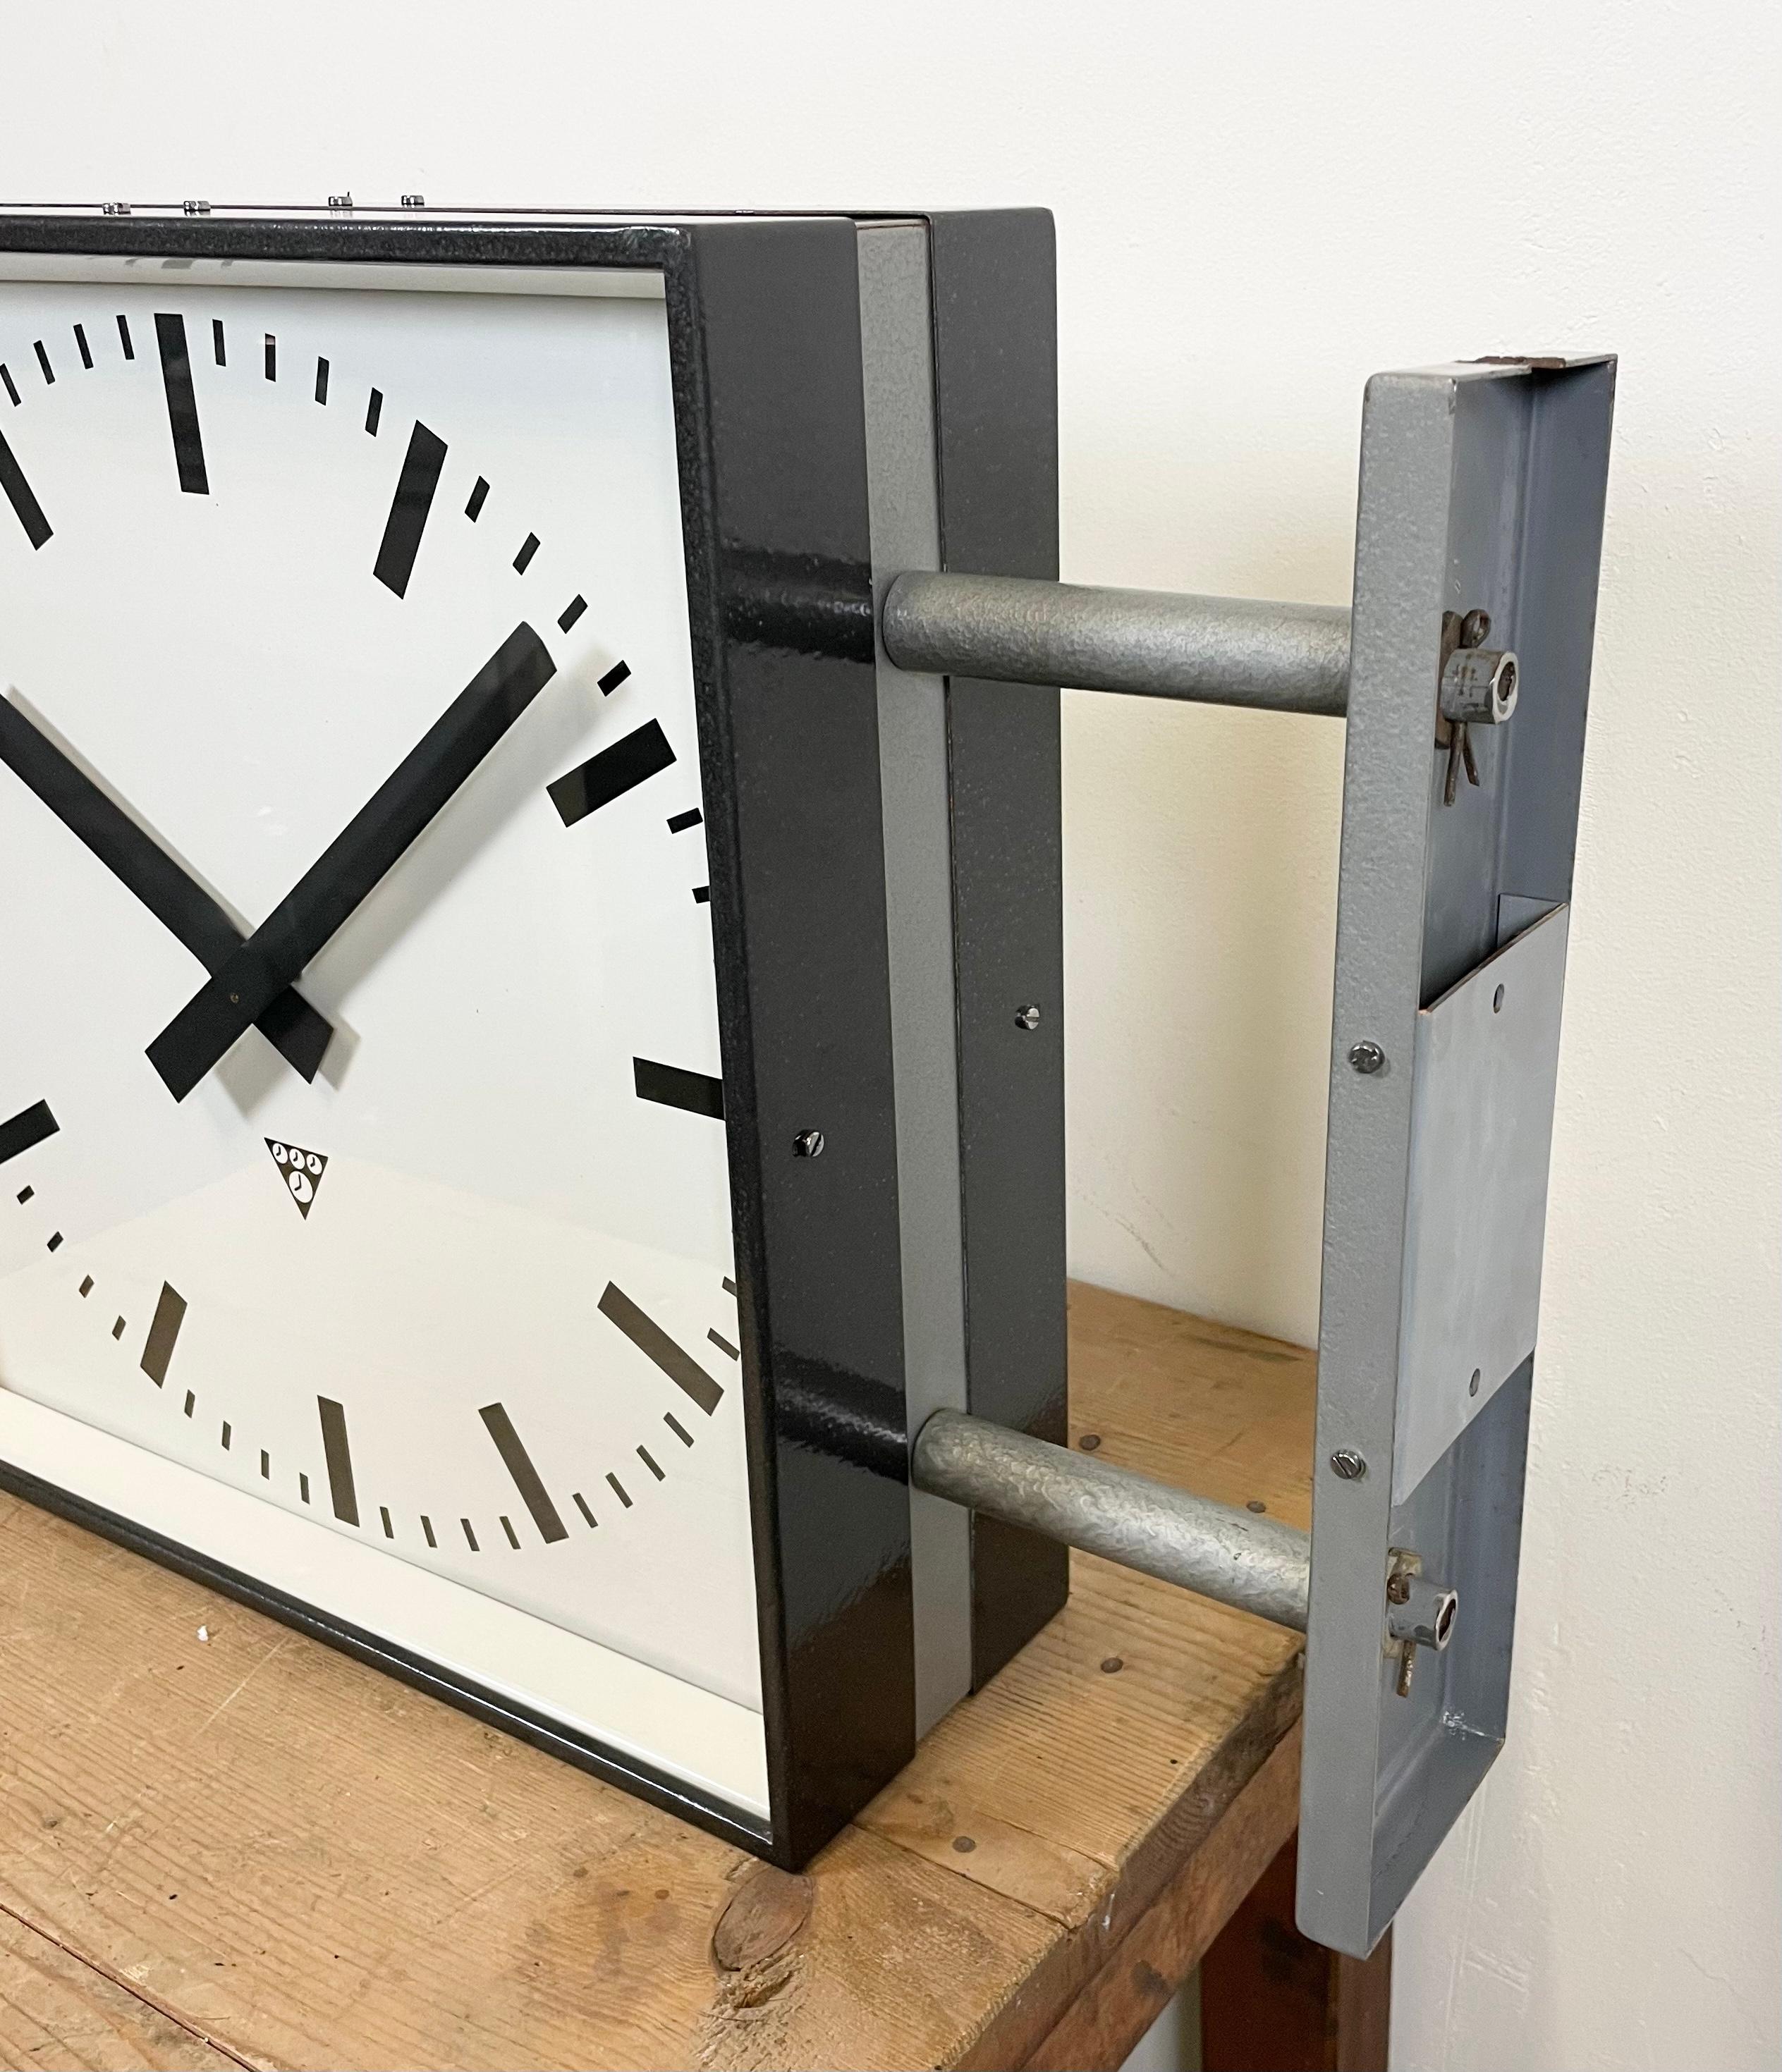 Czech Large Square Industrial Double-Sided Factory Wall Clock from Pragotron, 1970s